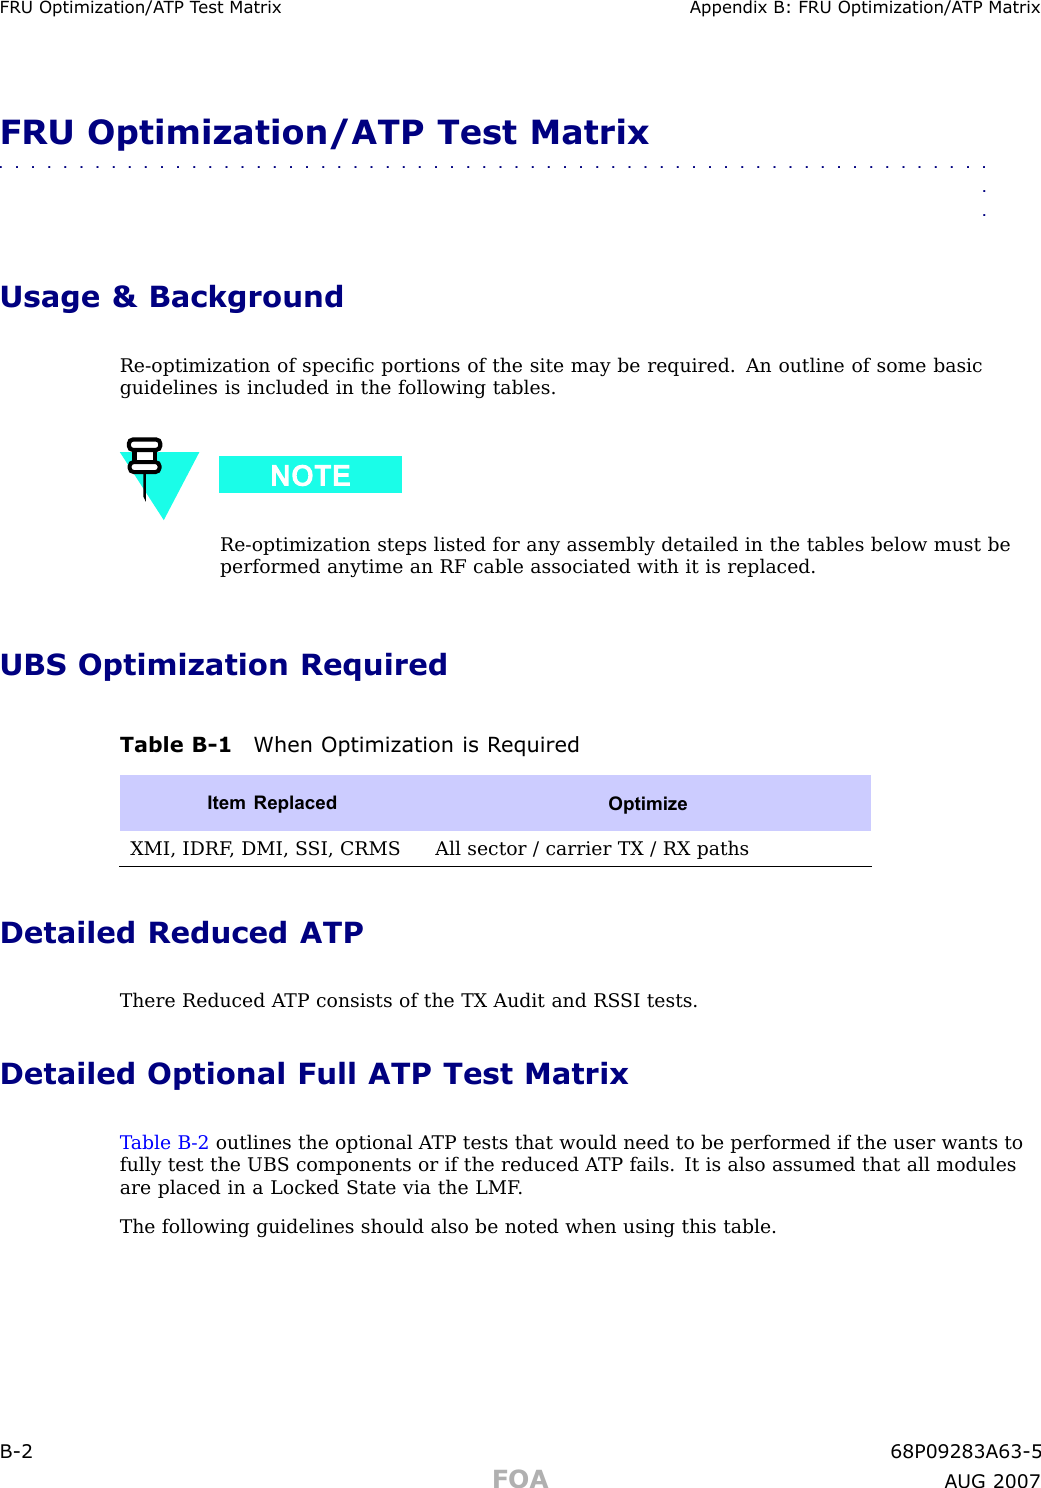 FRU Optimization/A TP T est Matrix Appendix B: FRU Optimization/A TP MatrixFRU Optimization/ATP Test Matrix■■■■■■■■■■■■■■■■■■■■■■■■■■■■■■■■■■■■■■■■■■■■■■■■■■■■■■■■■■■■■■■■Usage &amp; BackgroundRe -optimization of speciﬁc portions of the site may be required. An outline of some basicguidelines is included in the following tables.Re -optimization steps listed for any assembly detailed in the tables below must beperformed anytime an RF cable associated with it is replaced.UBS Optimization RequiredTable B -1 When Optimization is R equiredItem ReplacedOptimizeXMI, IDRF , DMI, S SI, CRMSAll sector / carrier TX / RX pathsDetailed Reduced ATPThere Reduced A TP consists of the TX Audit and RS SI tests.Detailed Optional Full ATP Test MatrixT able B -2 outlines the optional A TP tests that would need to be performed if the user wants tofully test the UBS components or if the reduced A TP fails. It is also assumed that all modulesare placed in a Locked State via the LMF .The following guidelines should also be noted when using this table.B -2 68P09283A63 -5FOA A UG 2007